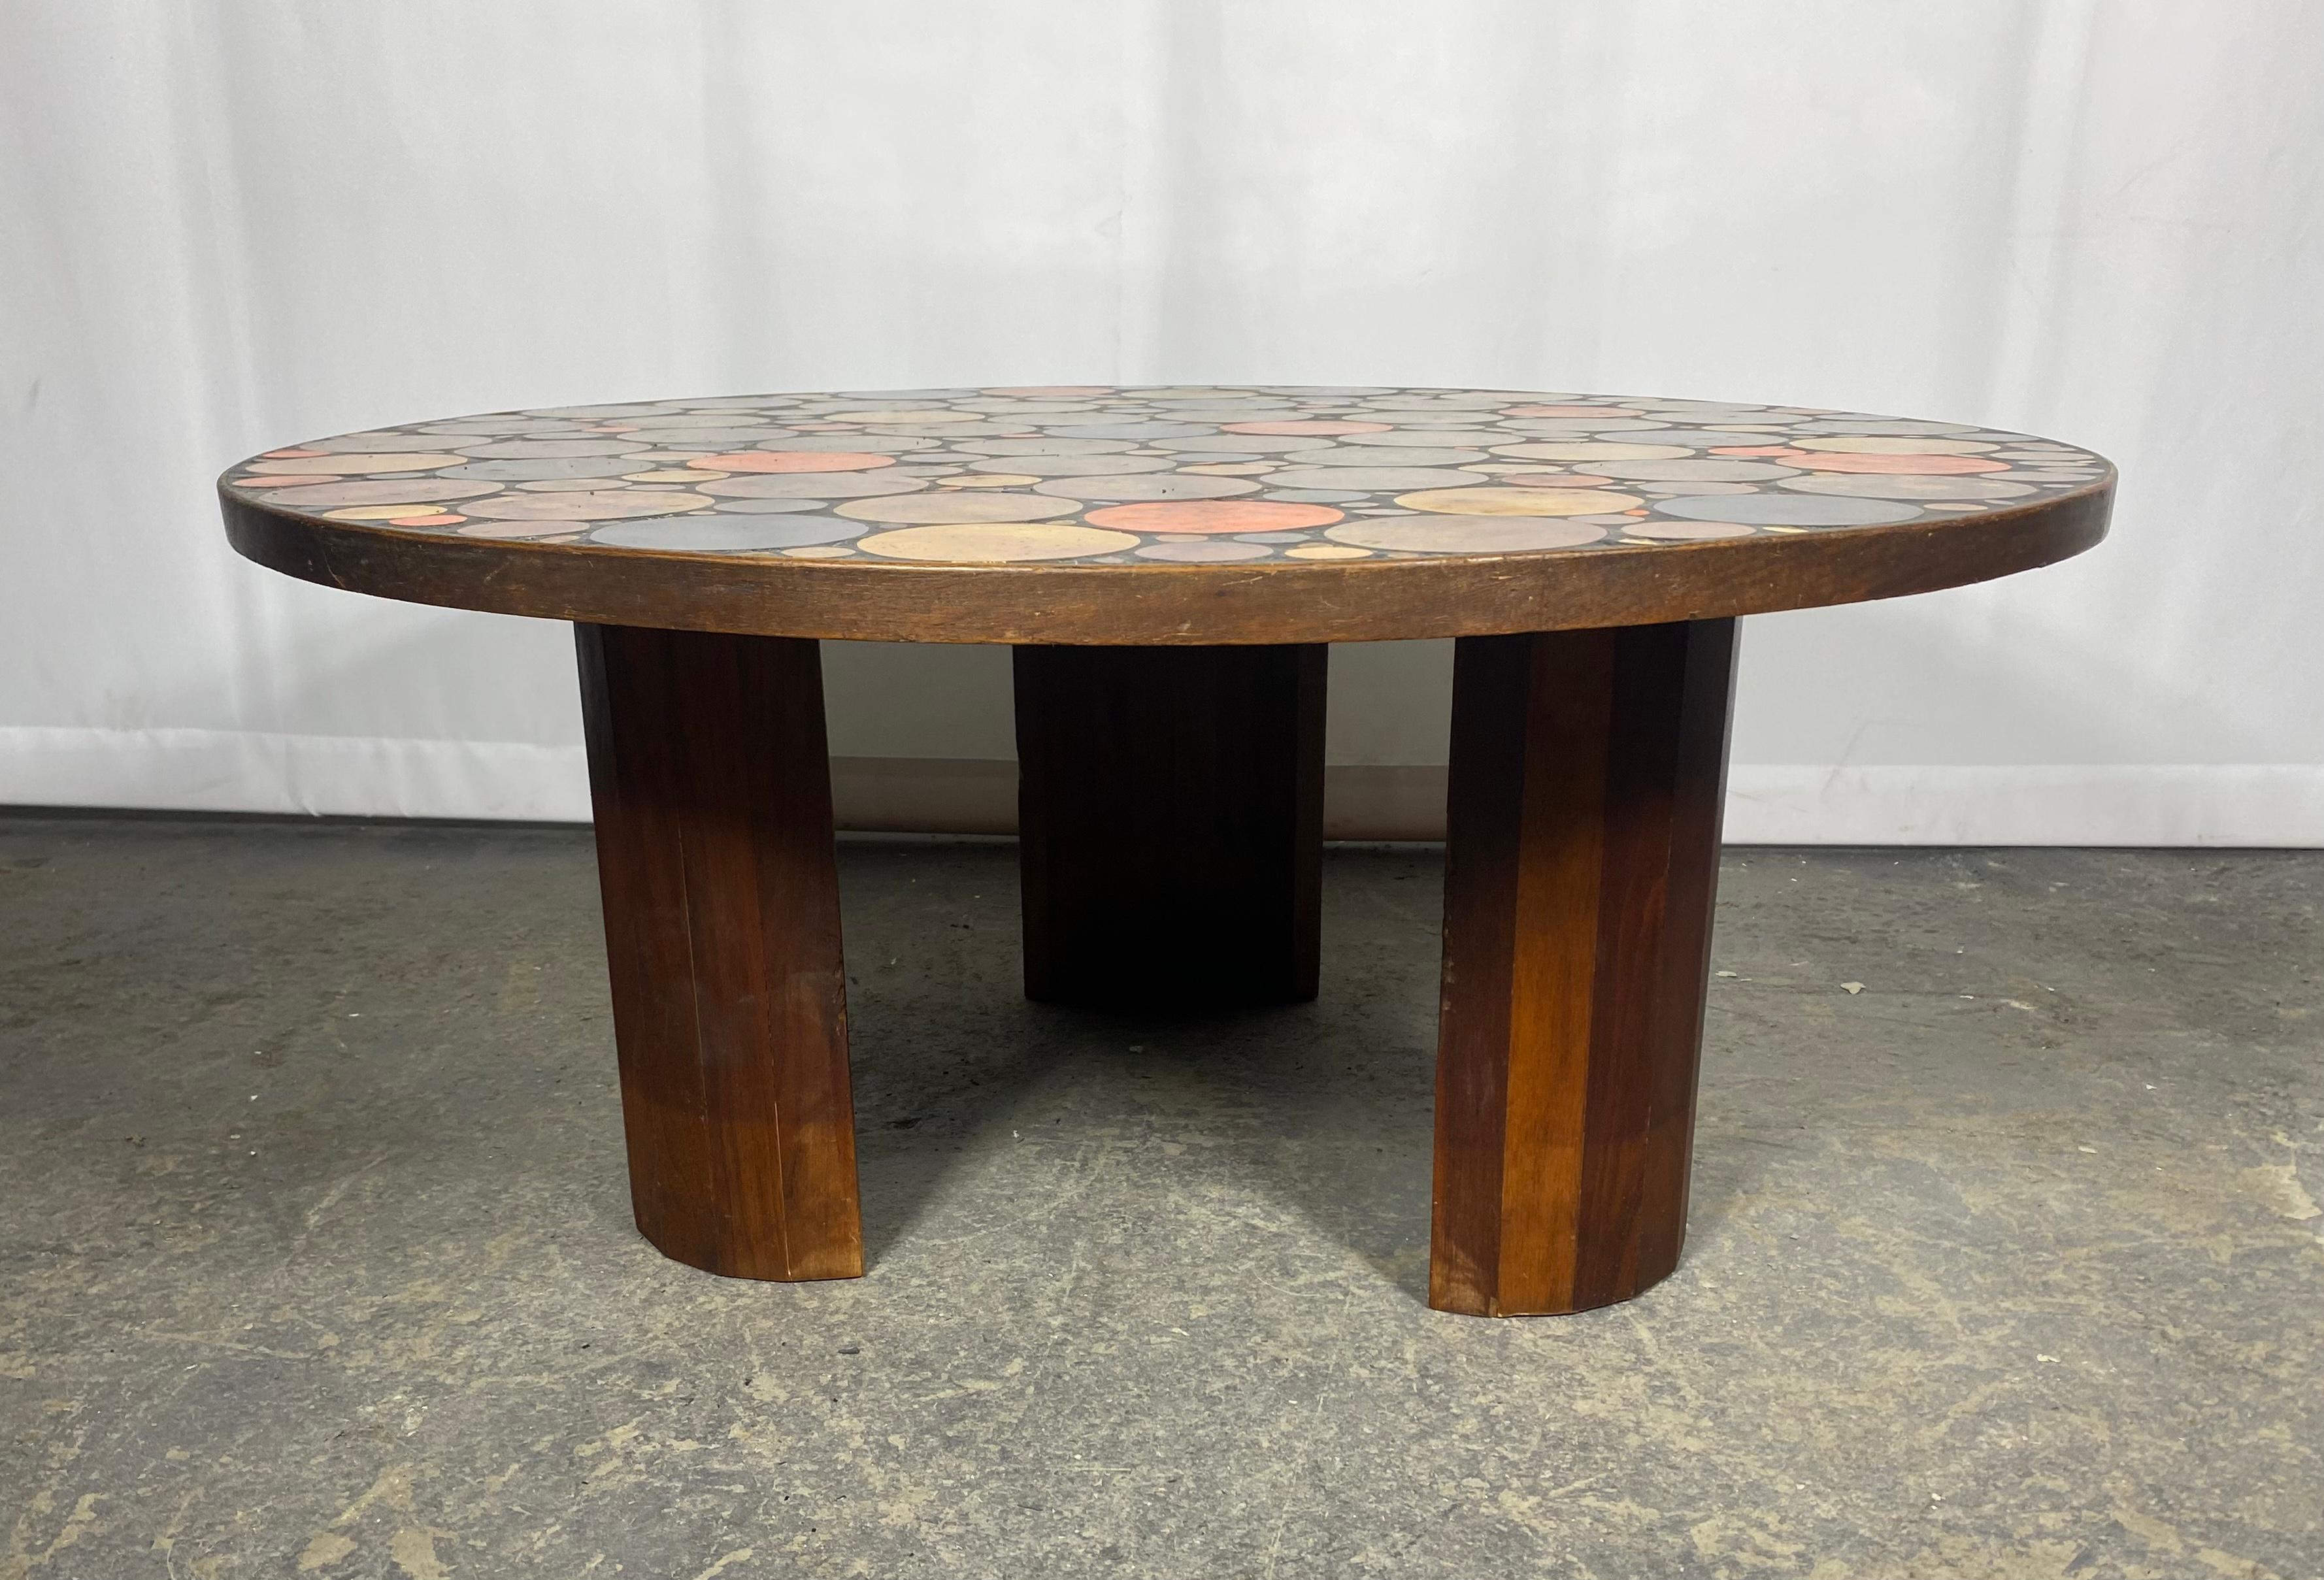 Stunning Roger Capron CERAMIC Tile Top Cocktail / Coffee Table ,,Amazing multi-color circles,Pop Modernist. 